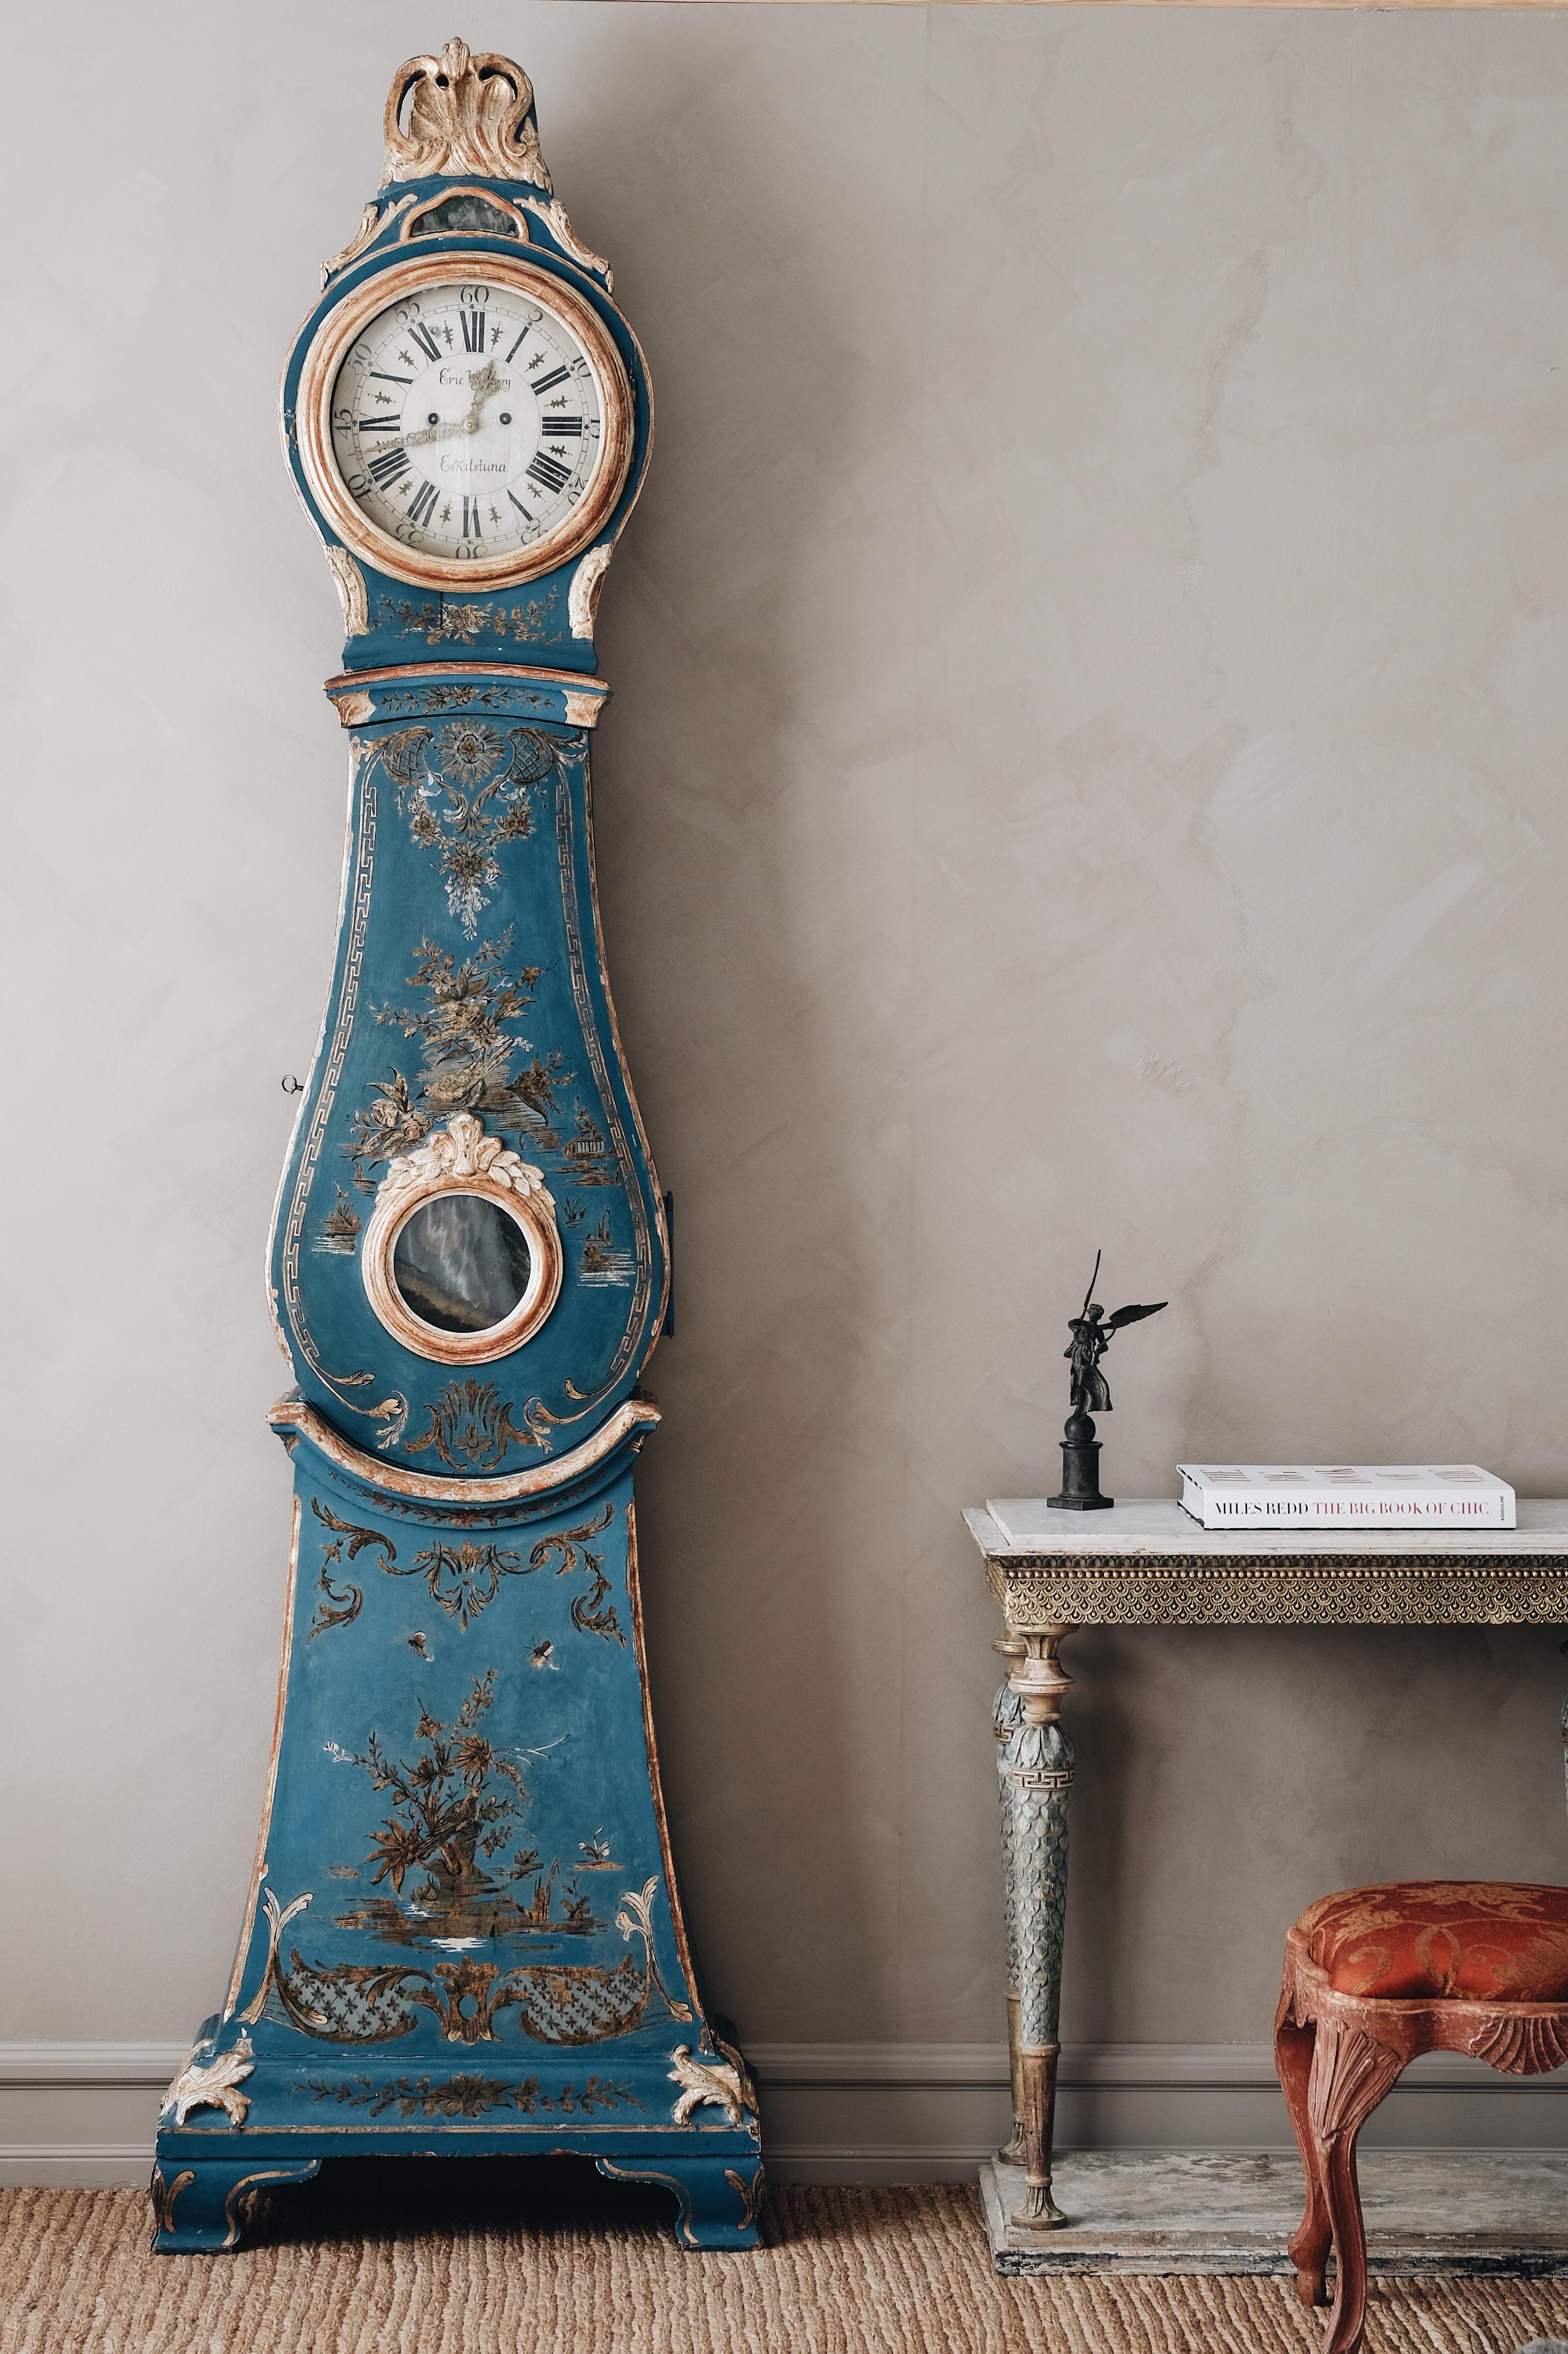 Fine 18th century Rococo tall case clock in original paint and chinoiserie, Sweden, circa 1770. 

Provenance: Hargs Castle, The property was created in the 1630s and was burned down in 1719, by the Russian Navy and only the church survived. The